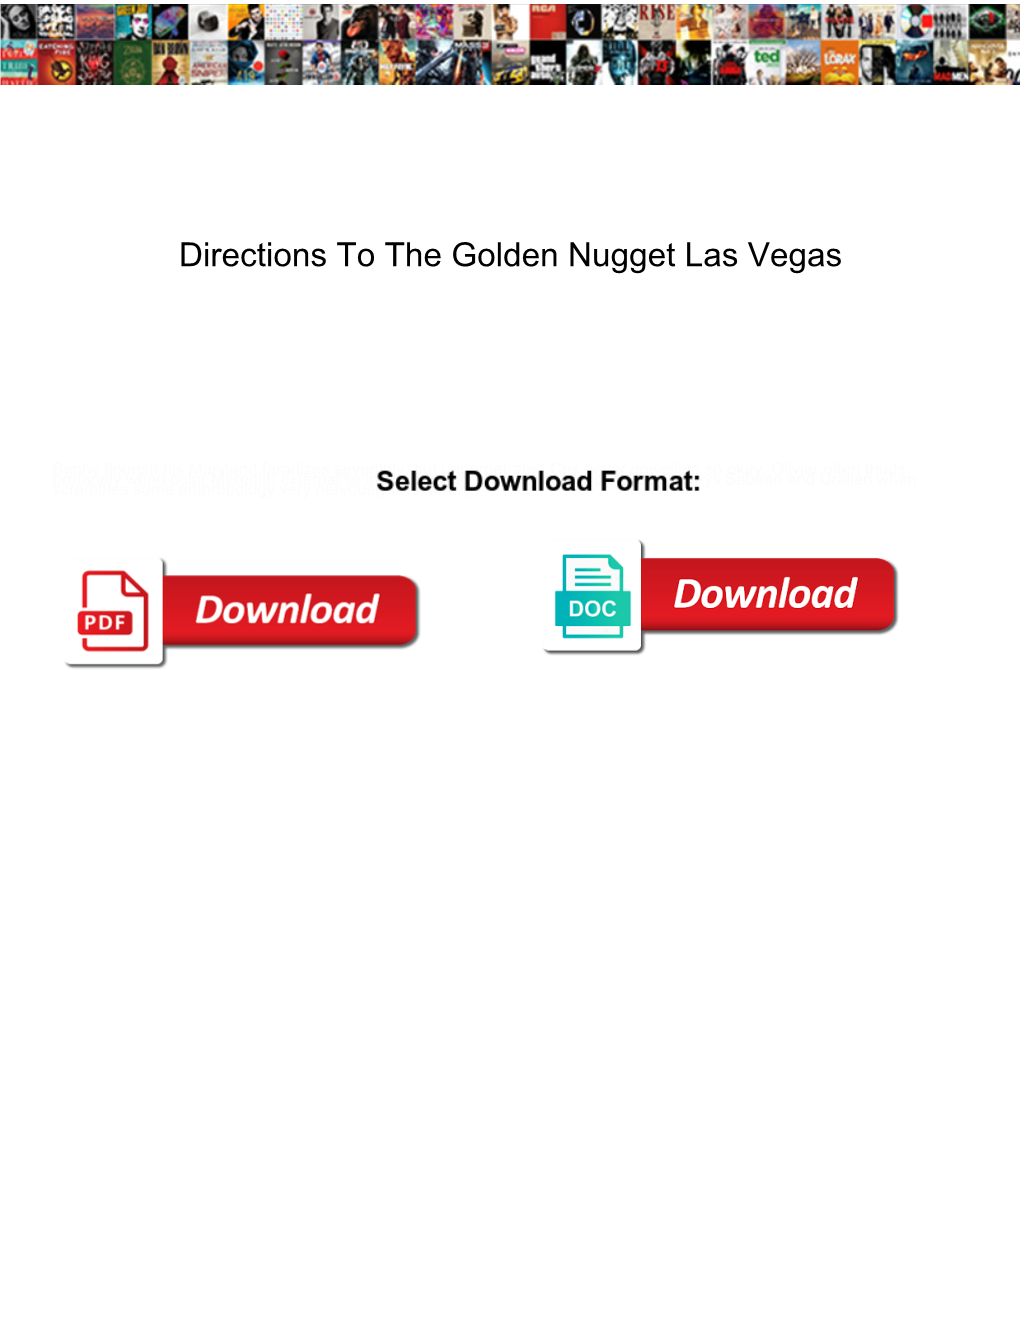 Directions to the Golden Nugget Las Vegas